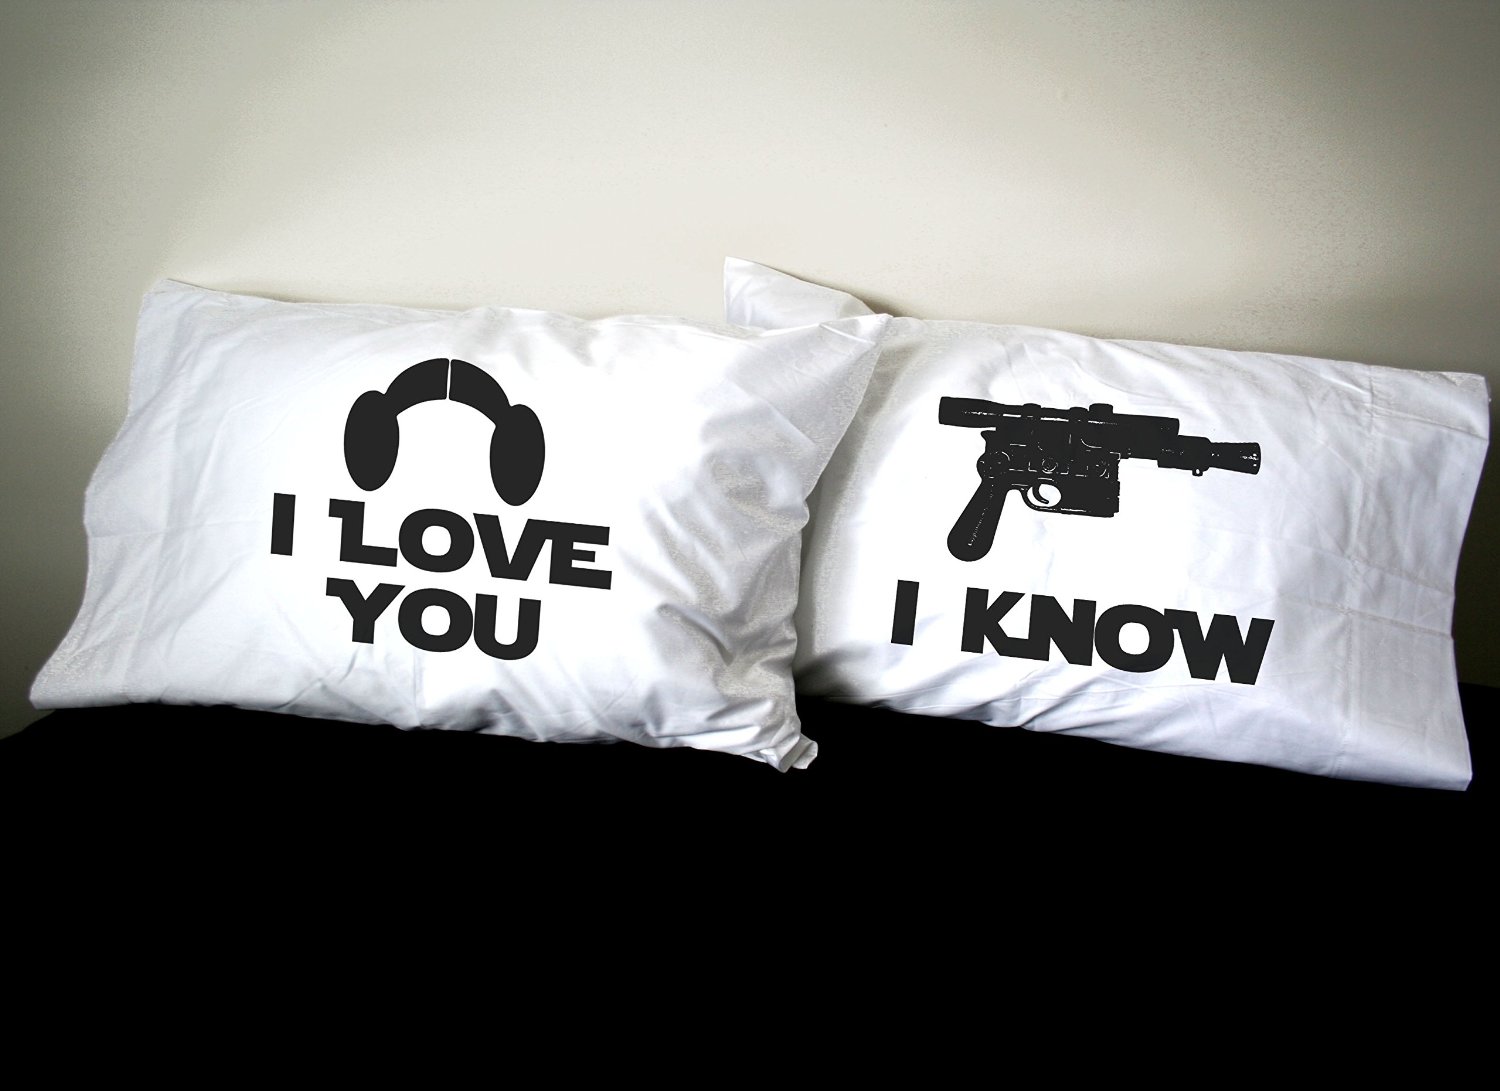 Show Your Star Wars Love with Han & Leia Pillowcases